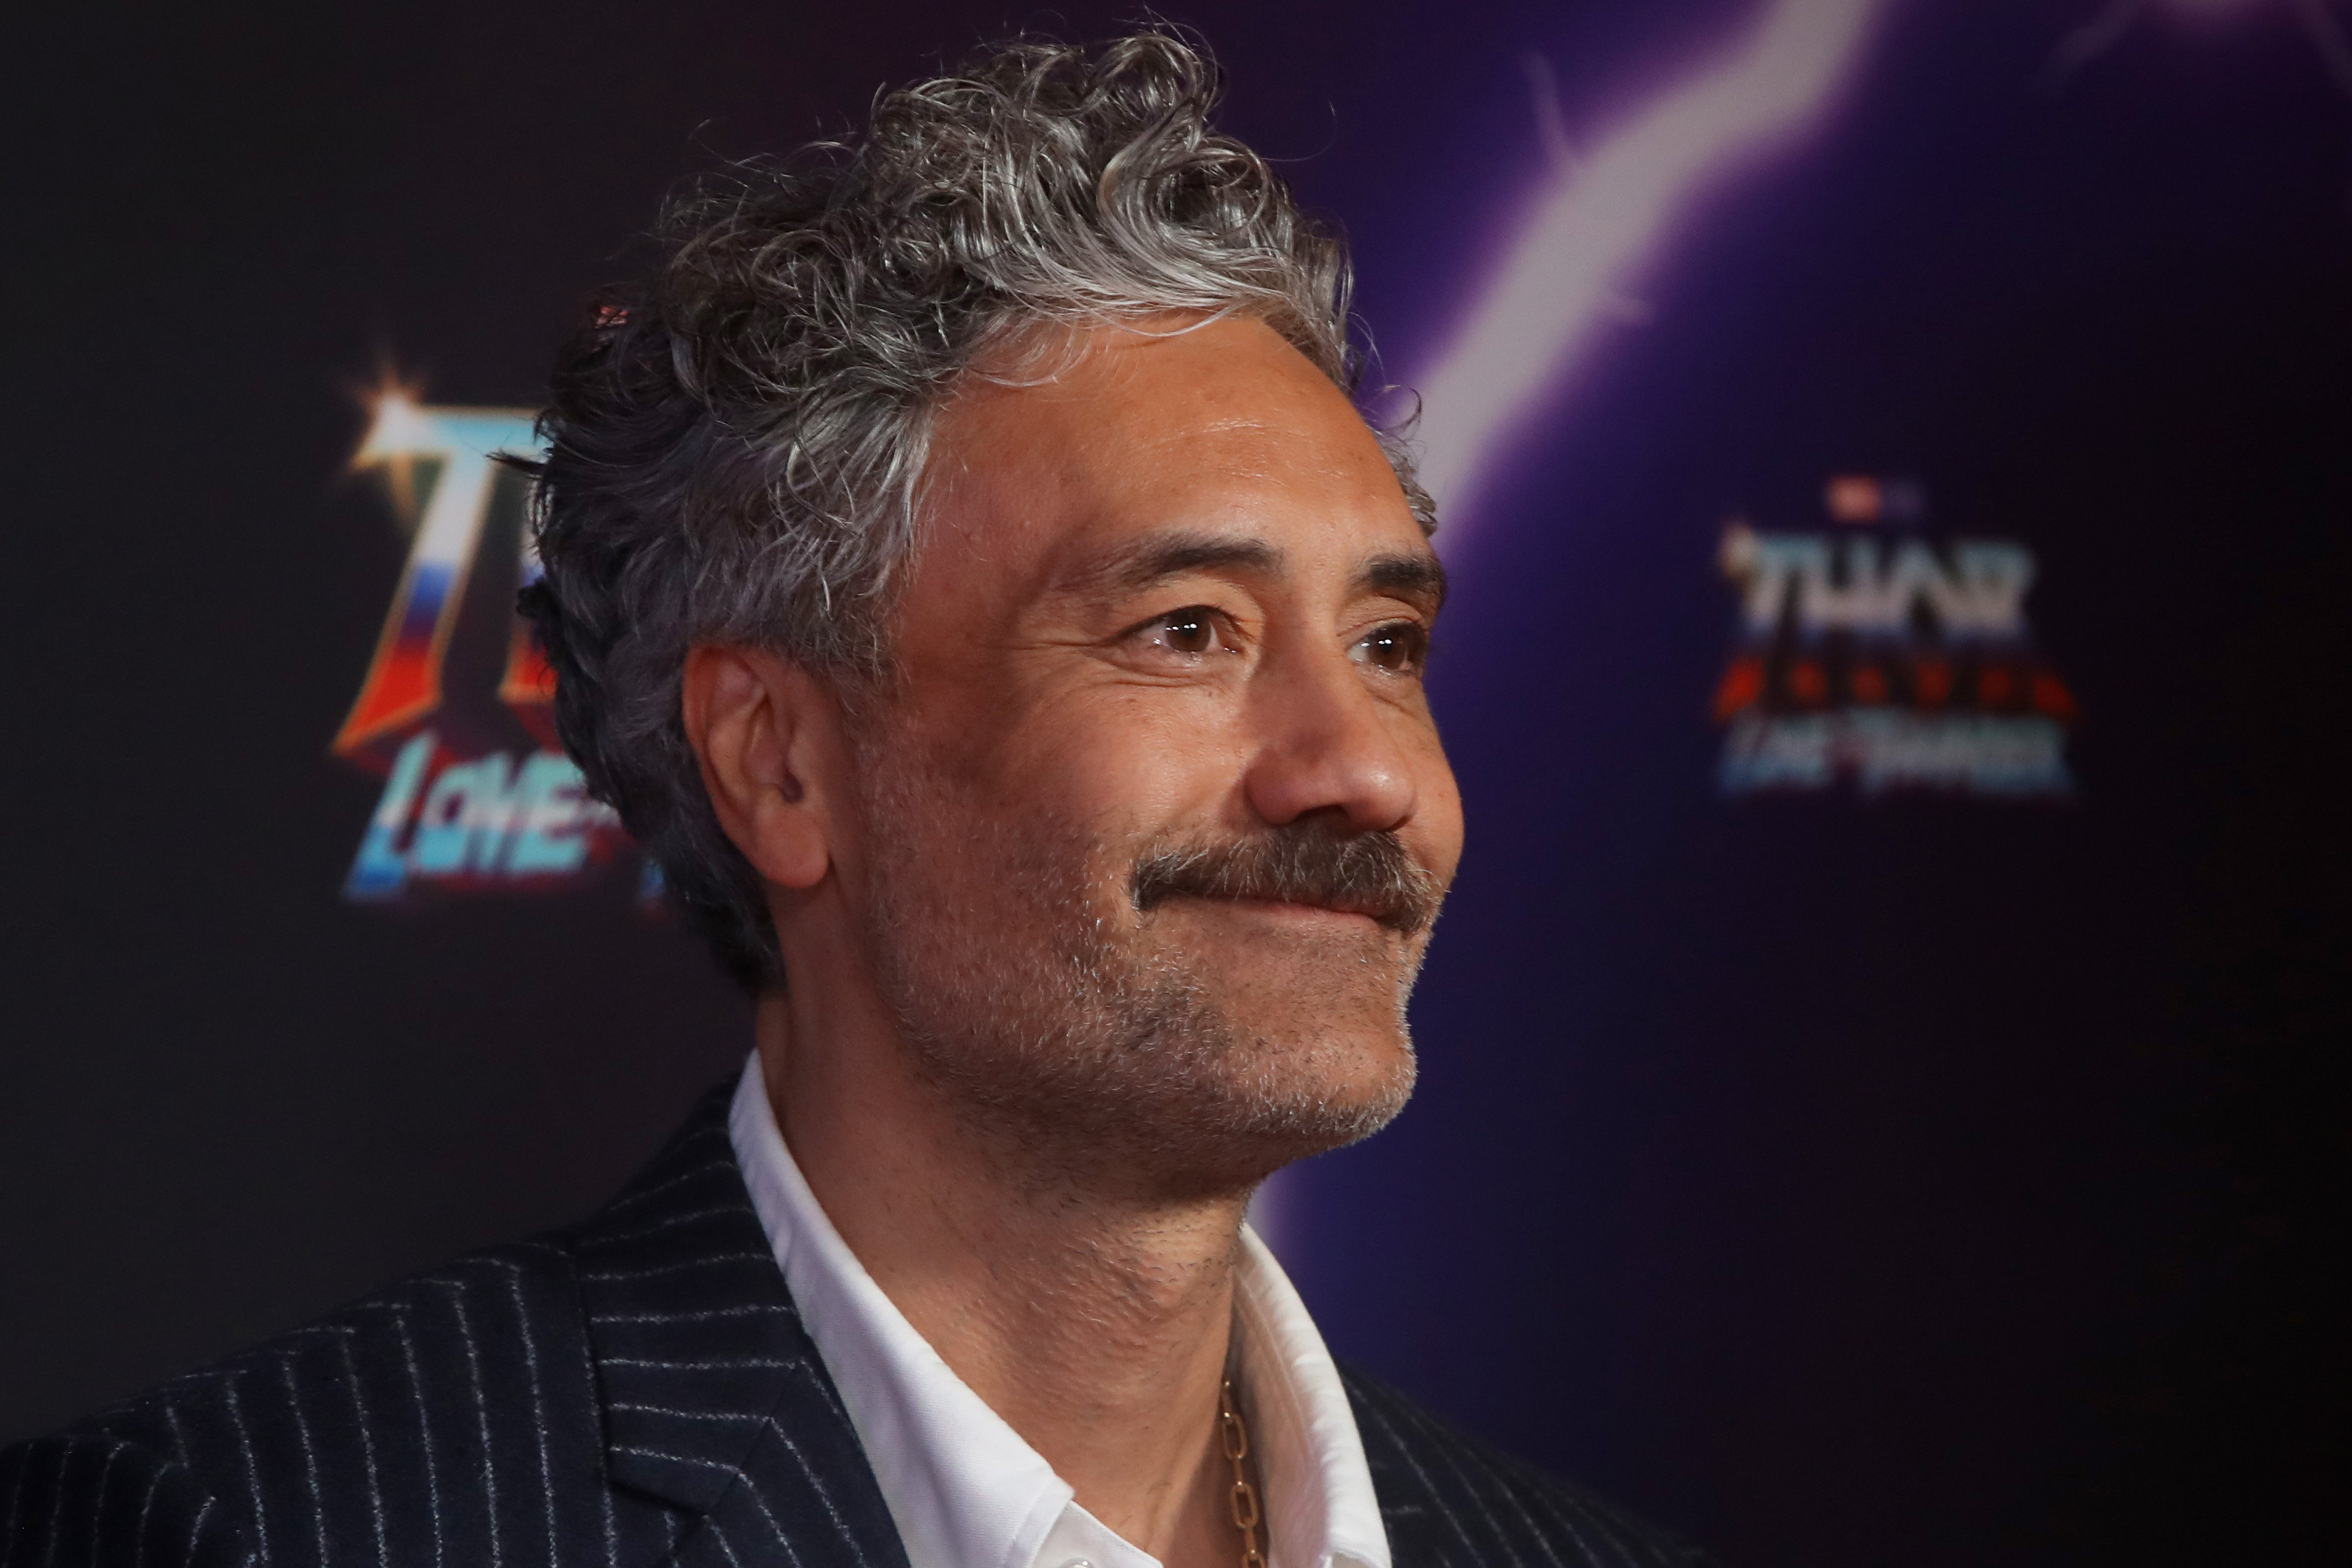 Taika Waititi attends the premiere of Thor: Love and Thunder in Sydney